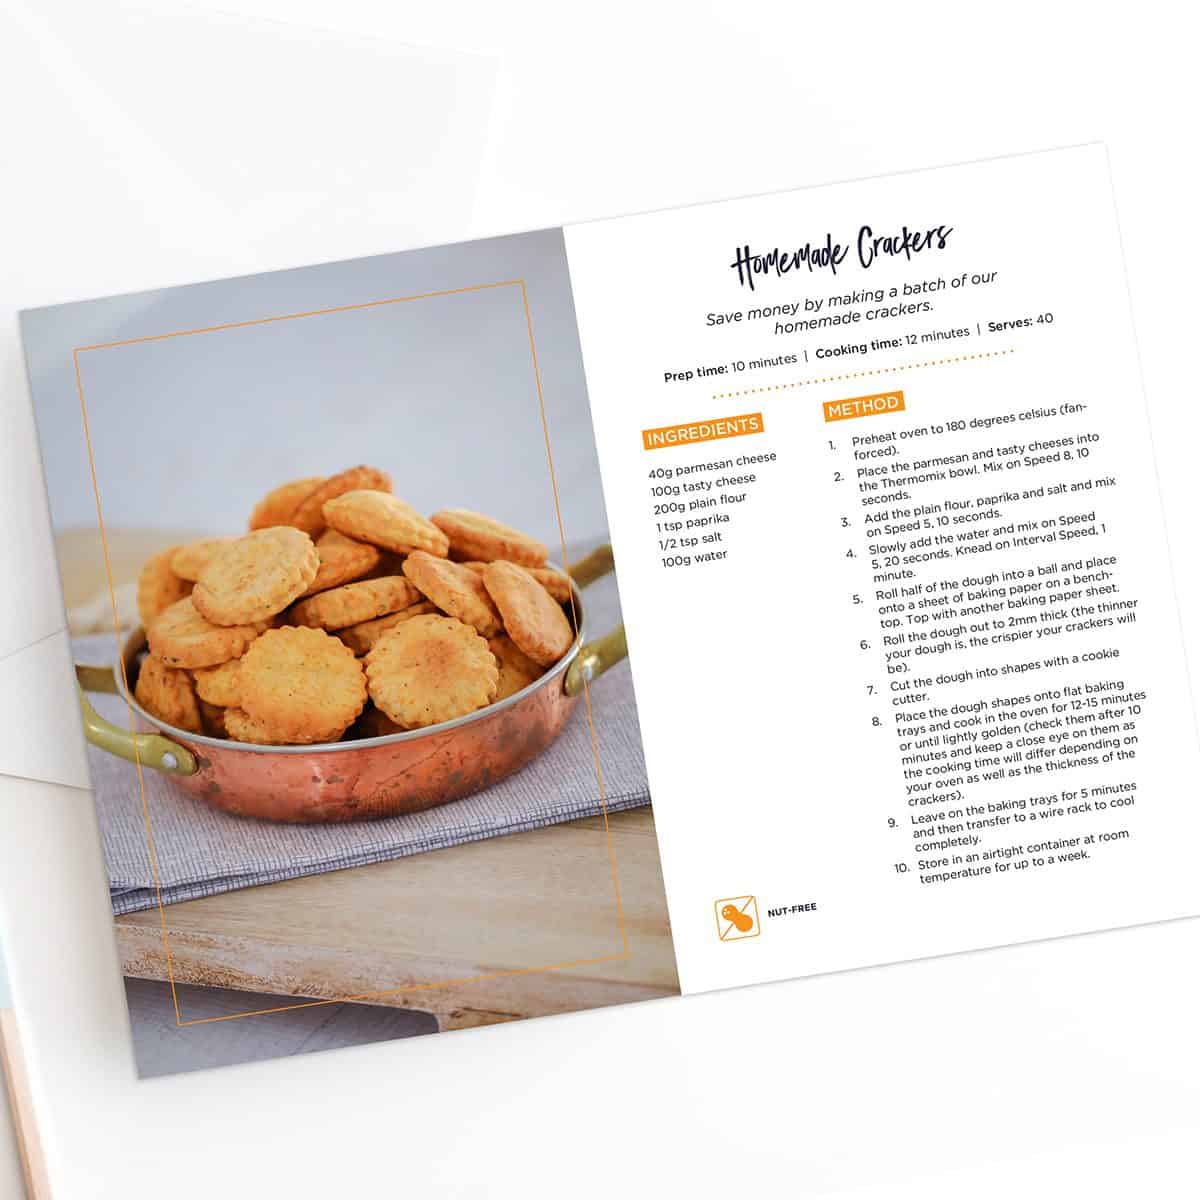 Image of Thermomix Lunch Box recipe book opened up to the recipe for Homemade Crackers.